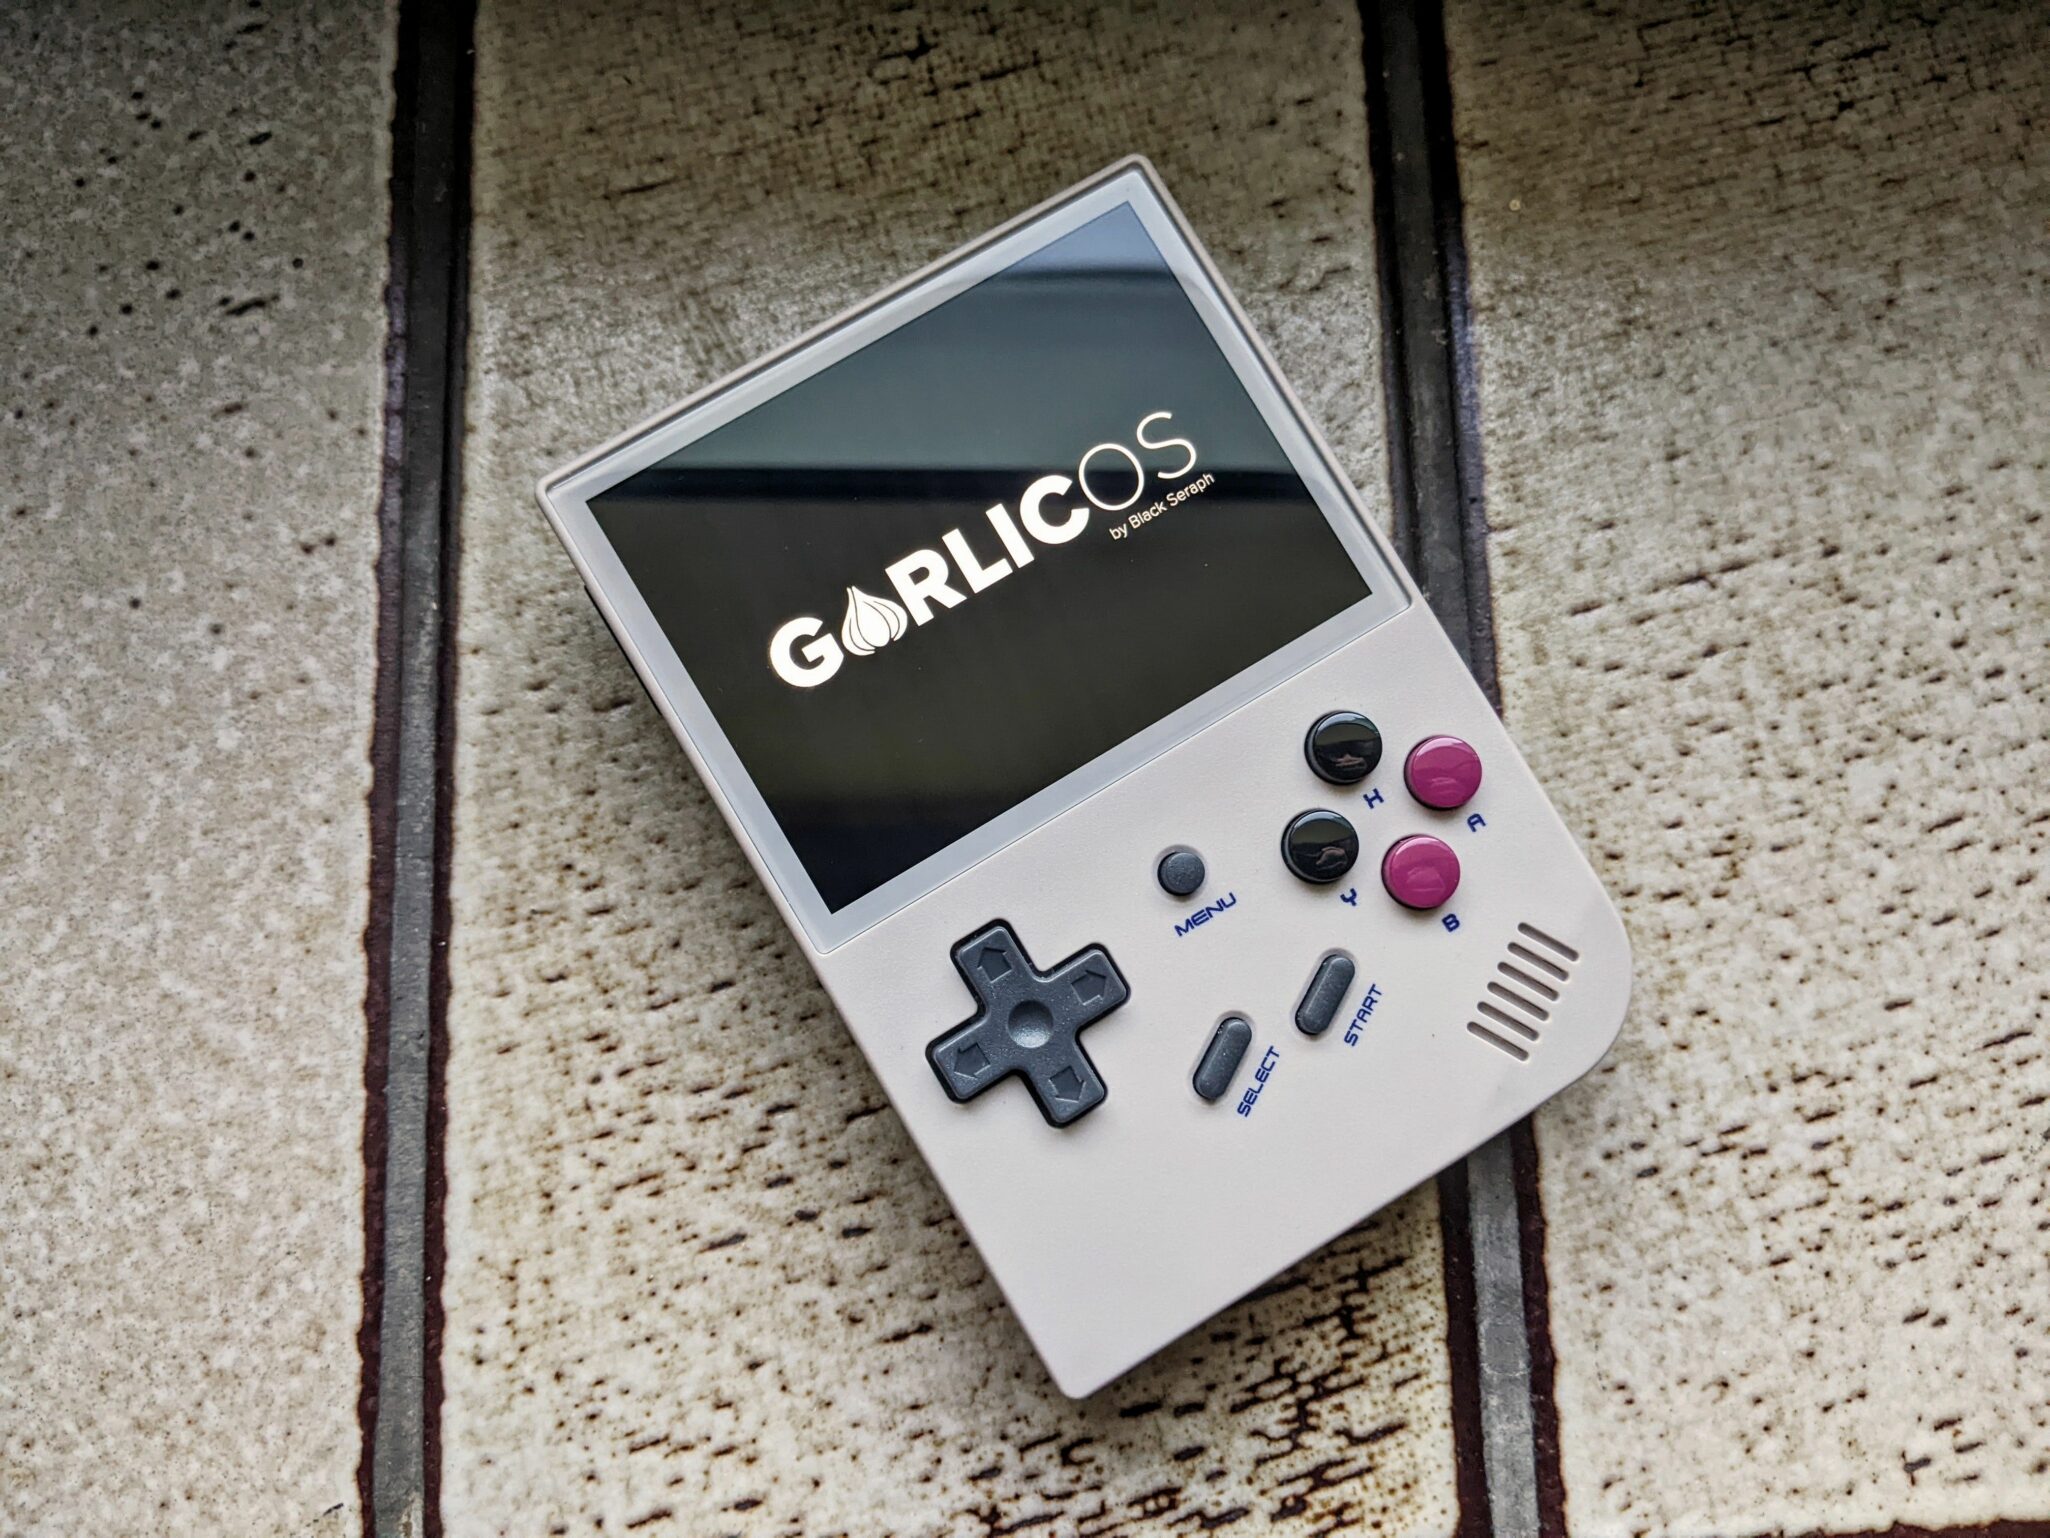 RG35XX Handheld Game Console Experience with Garlic OS. Will GarlicOS 2.0 go open source?